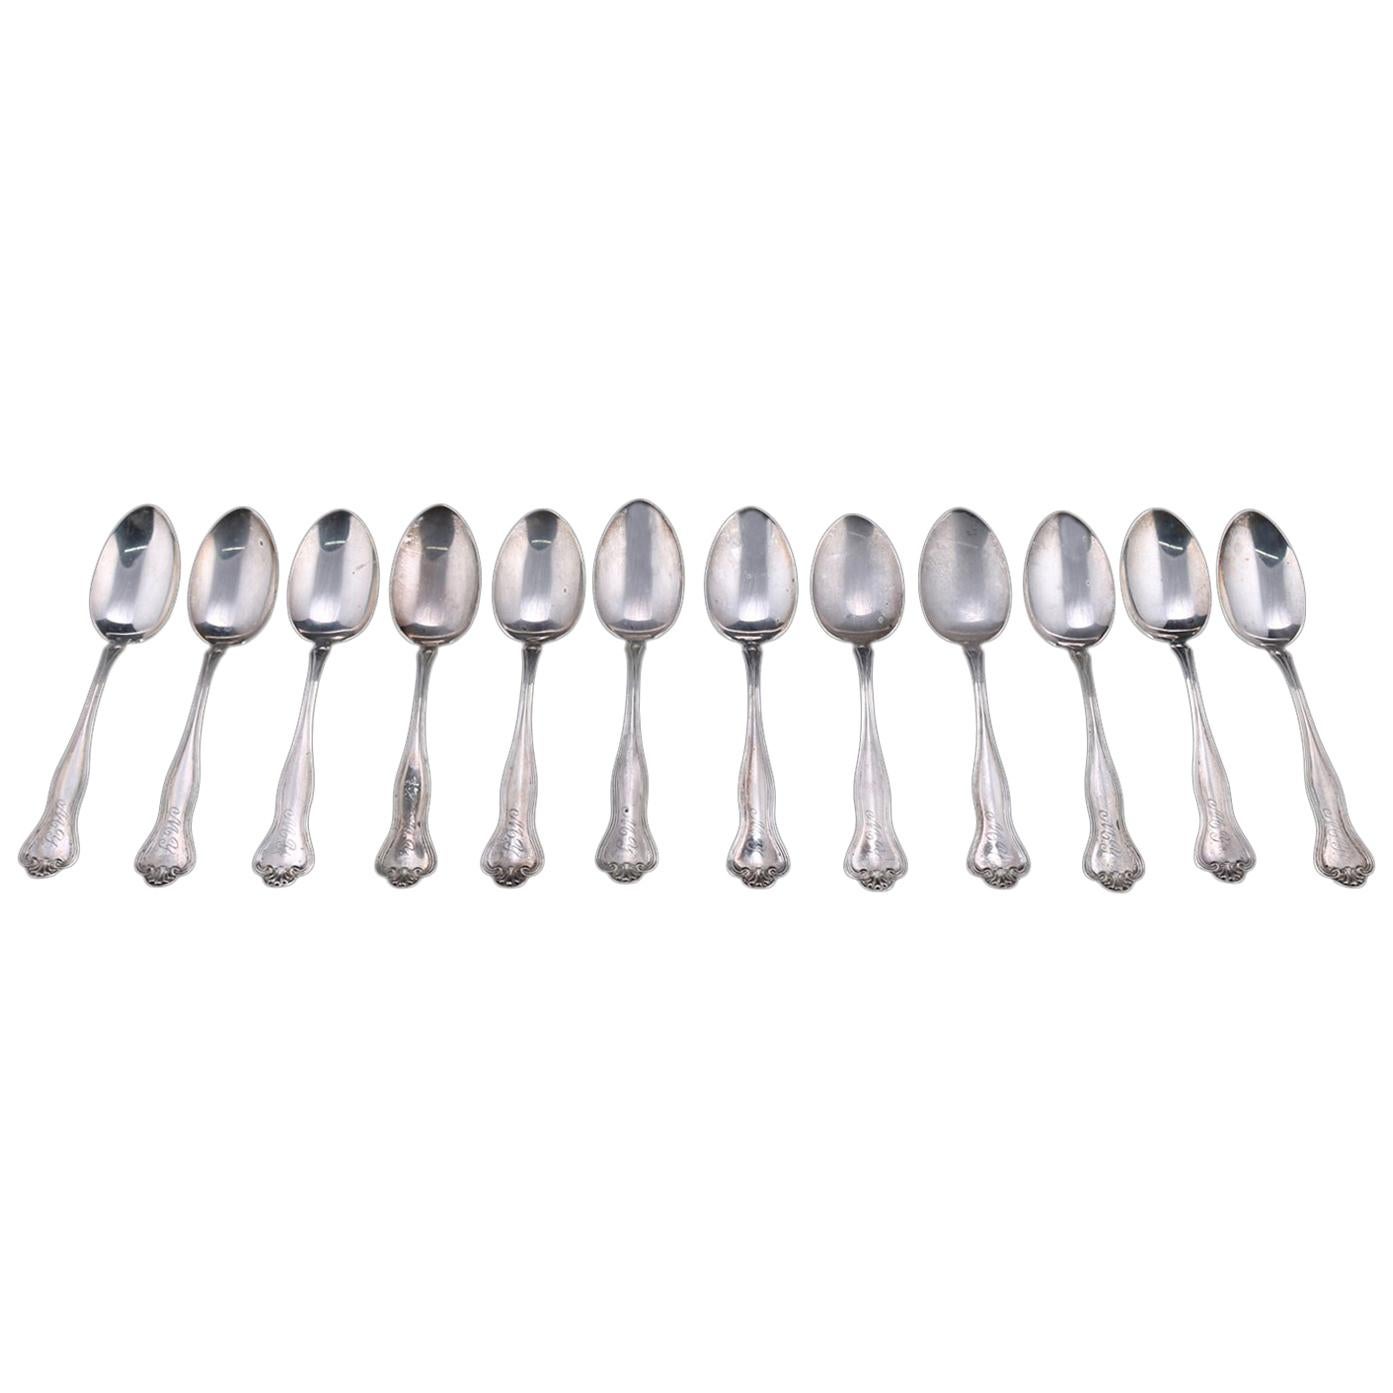 Antique Set of 12 Sterling Silver Teaspoons, 9.77 Toz, circa 1900